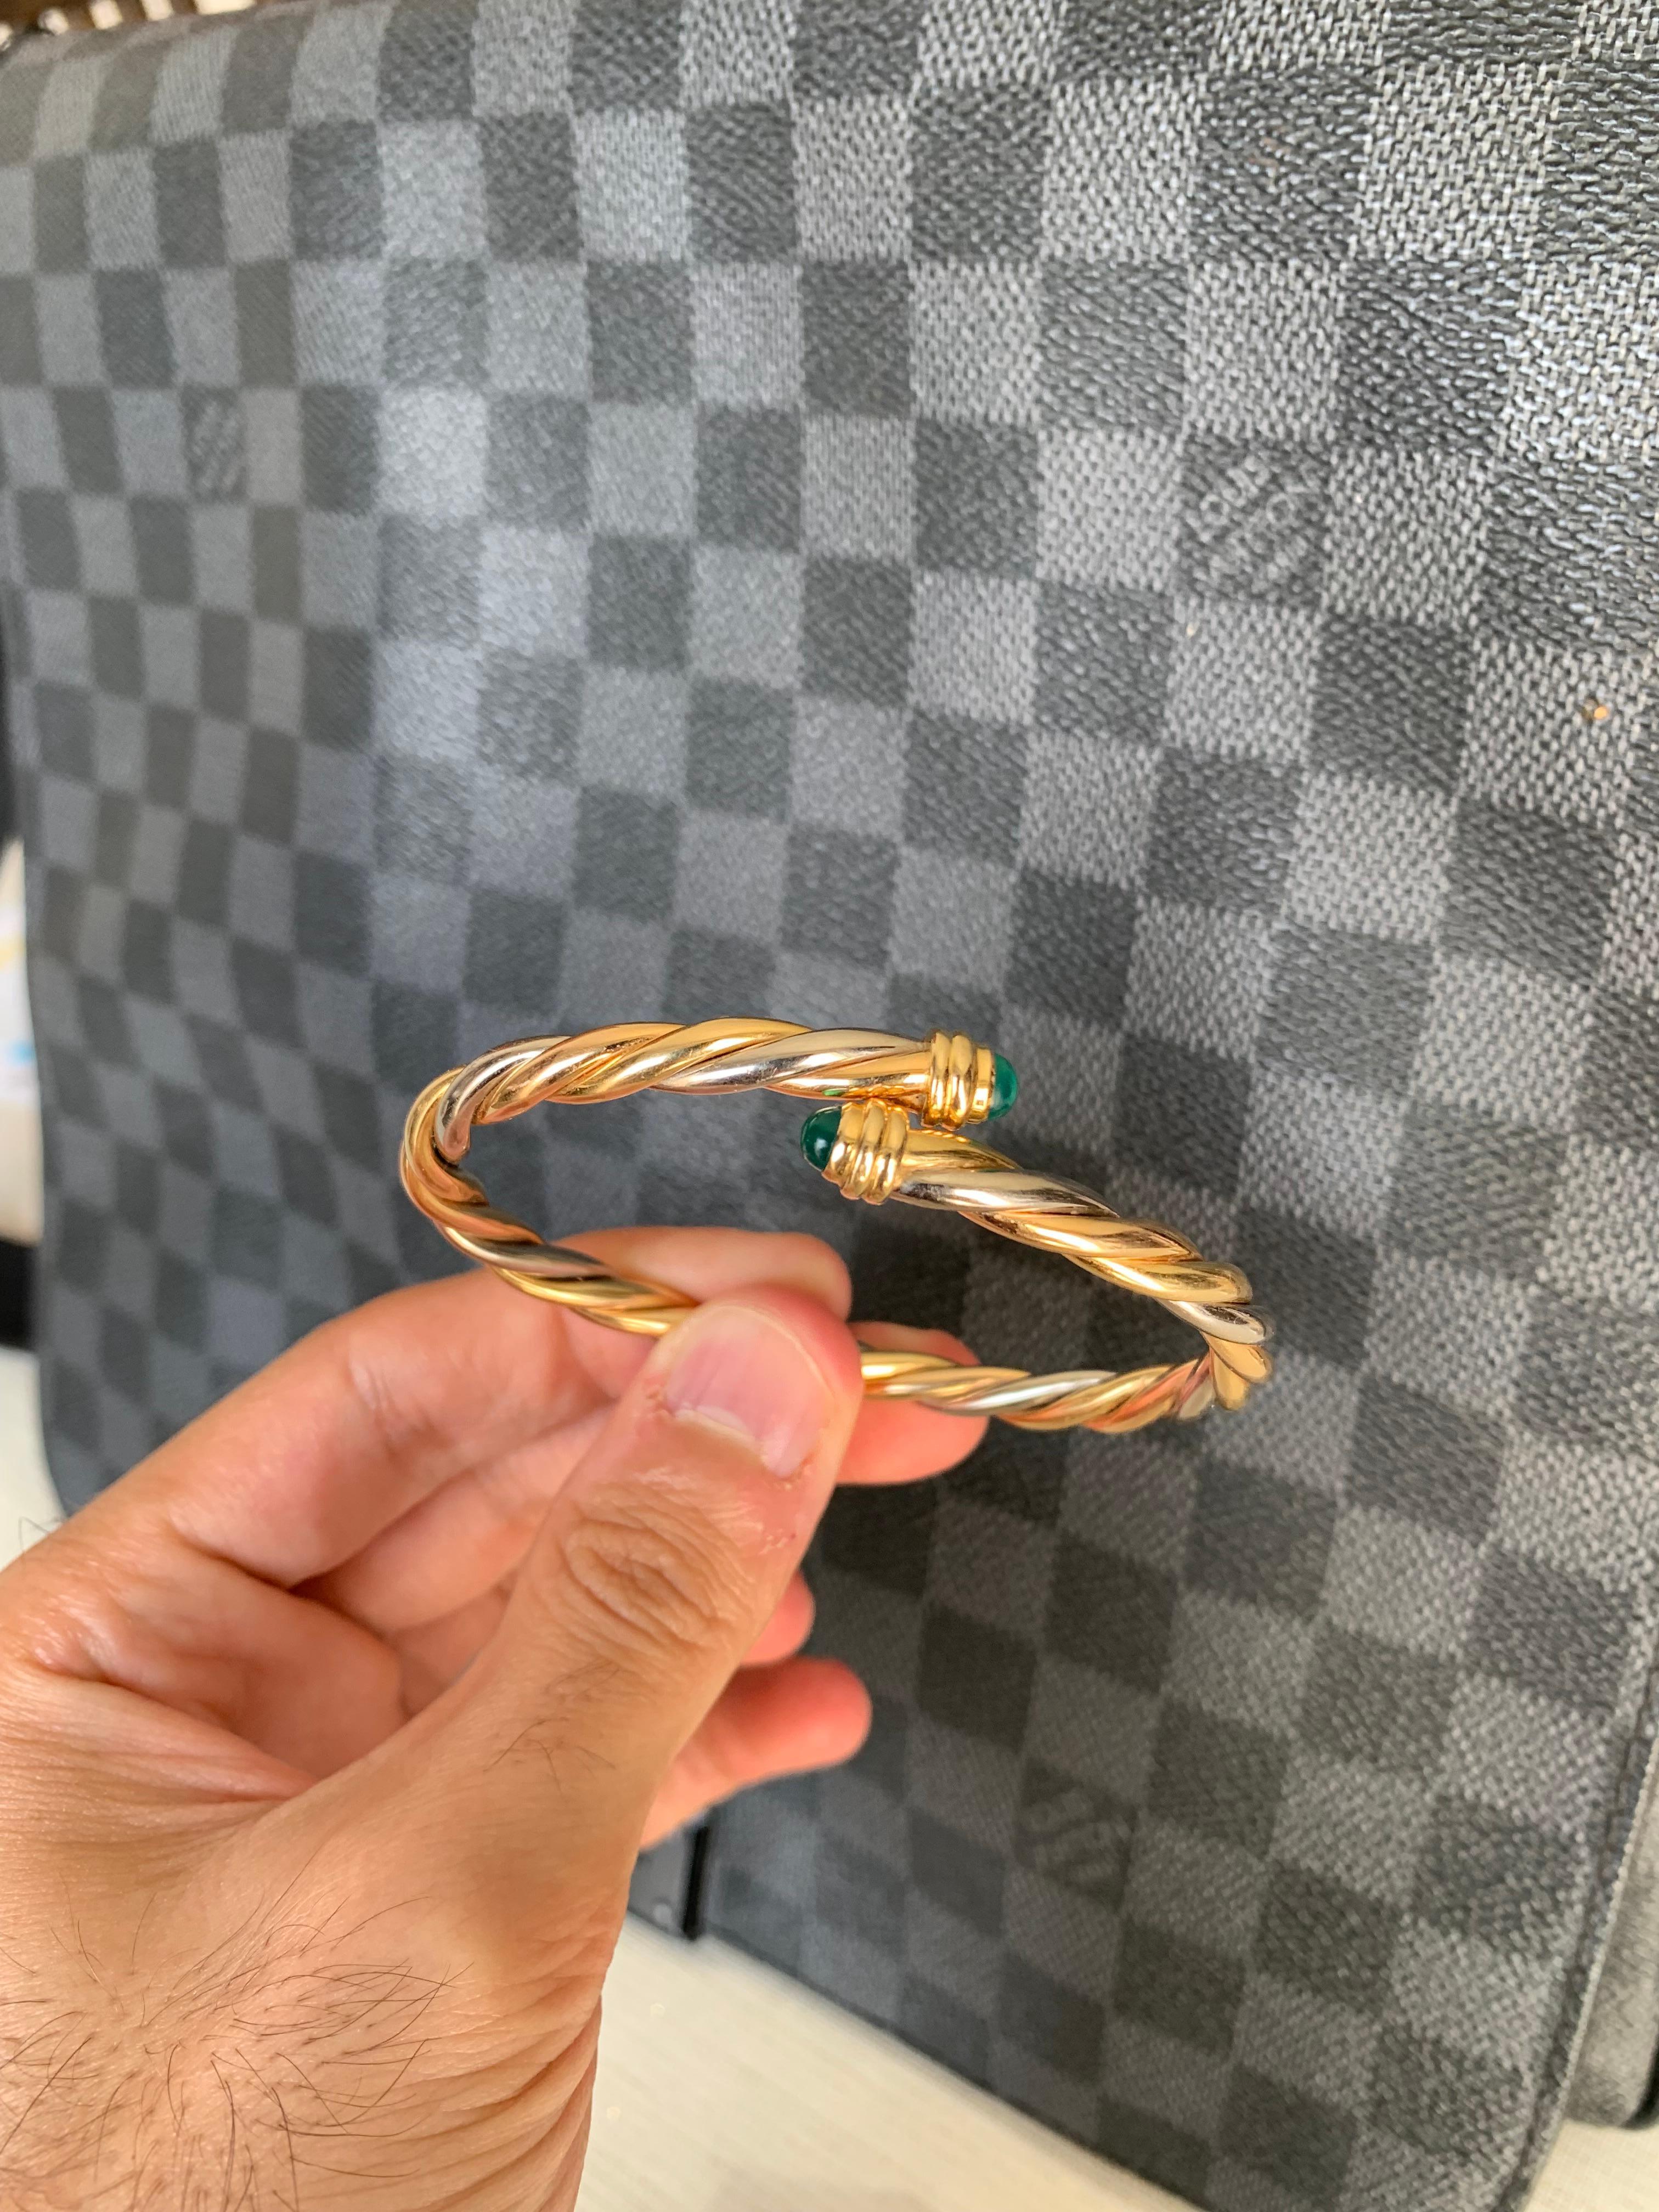 Beautifully Hand Crafted 18k Yellow, White & Rose Gold Trinity Bangle Bracelet Made & Signed By “Cartier”.
Signed “Cartier”.
Amazing Shine, Incredible Craftsmanship.
Great Statement Piece.
Very Comfortable Fit On The Wrist.
Can Fit Almost Any Wrist